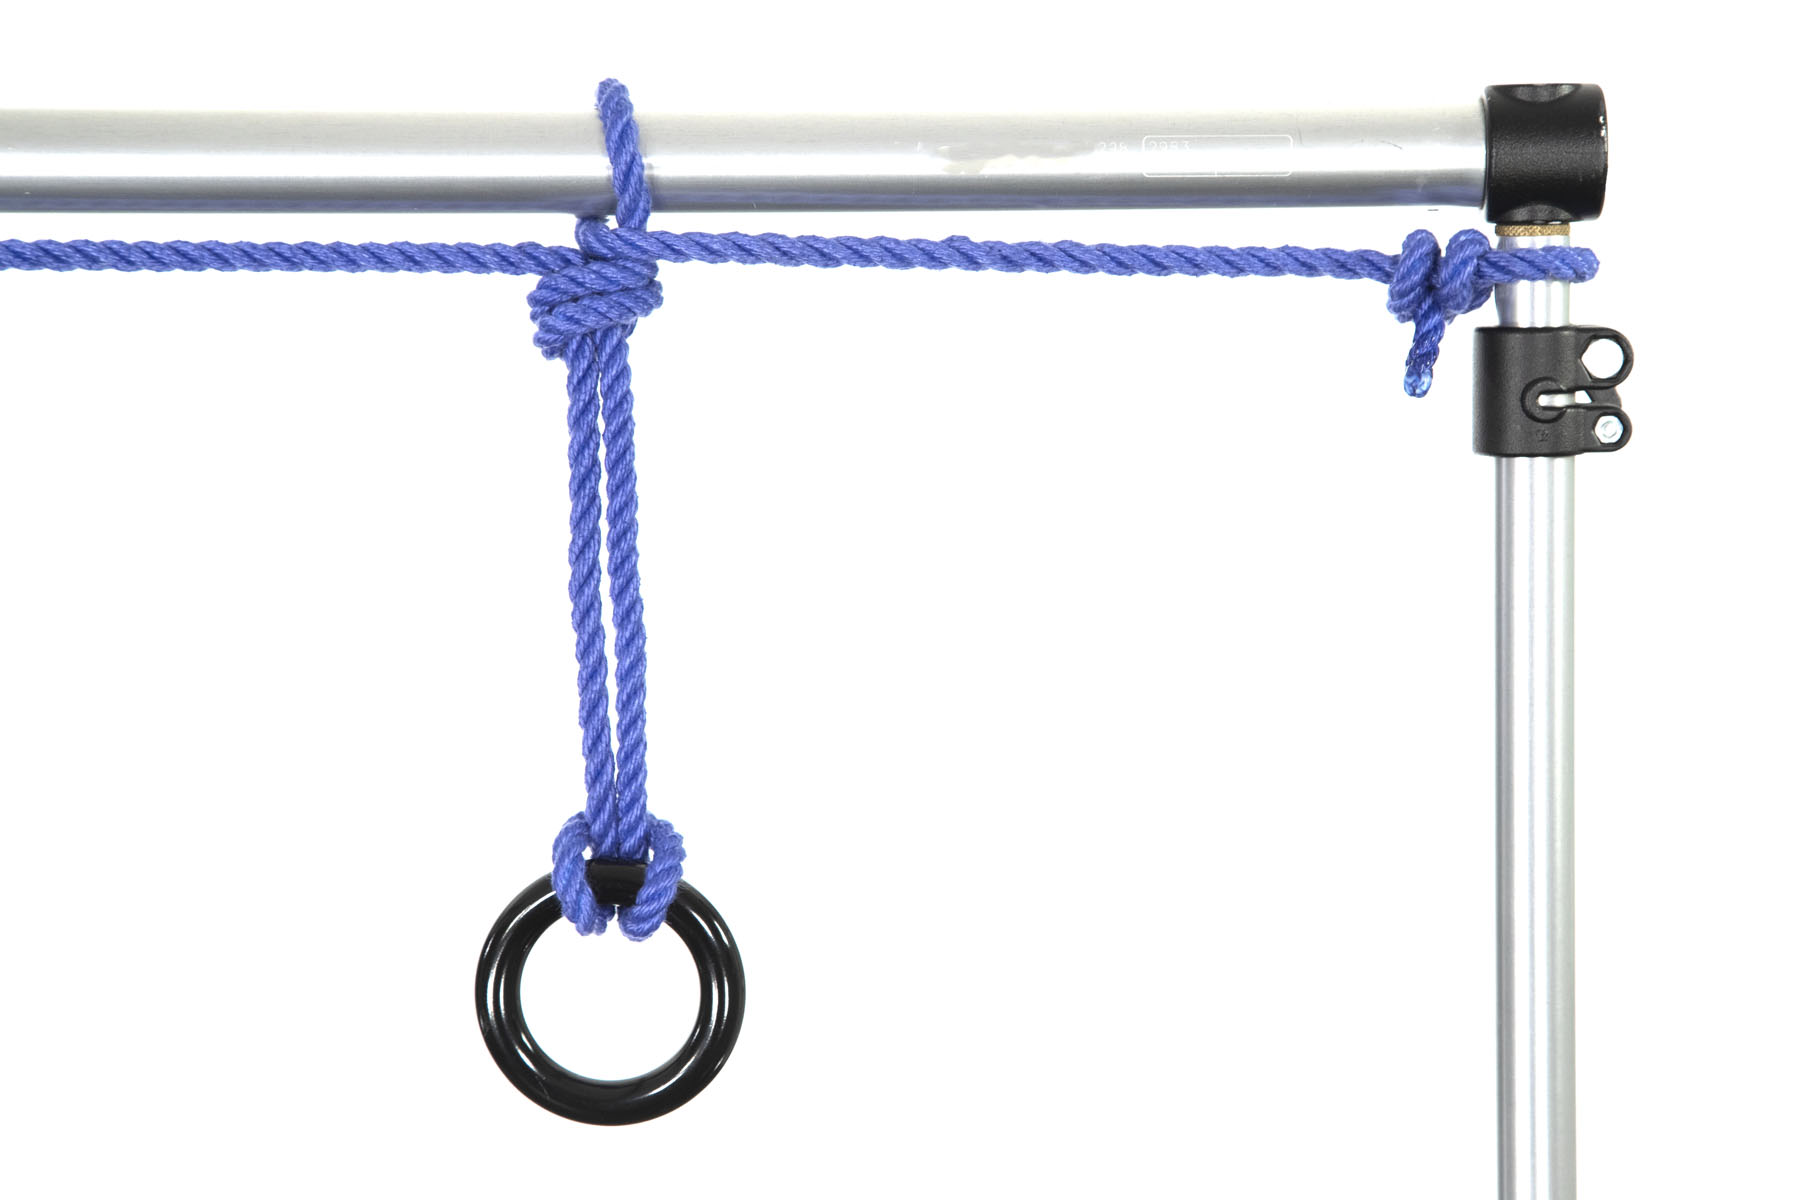 A one inch aluminum pipe enters the frame from the left. Near the right edge of the frame, it connects at ninety degrees to another pipe that exits the frame to the bottom. A blue rope enters the frame from the left, running along the pipe. It is tied in a on overhand loop knot that is secured to the pipe, and is then tied off to the vertical pipe on the right with two half hitches. A black rappel ring has been attached to the overhand loop using a lark’s head on a bight.